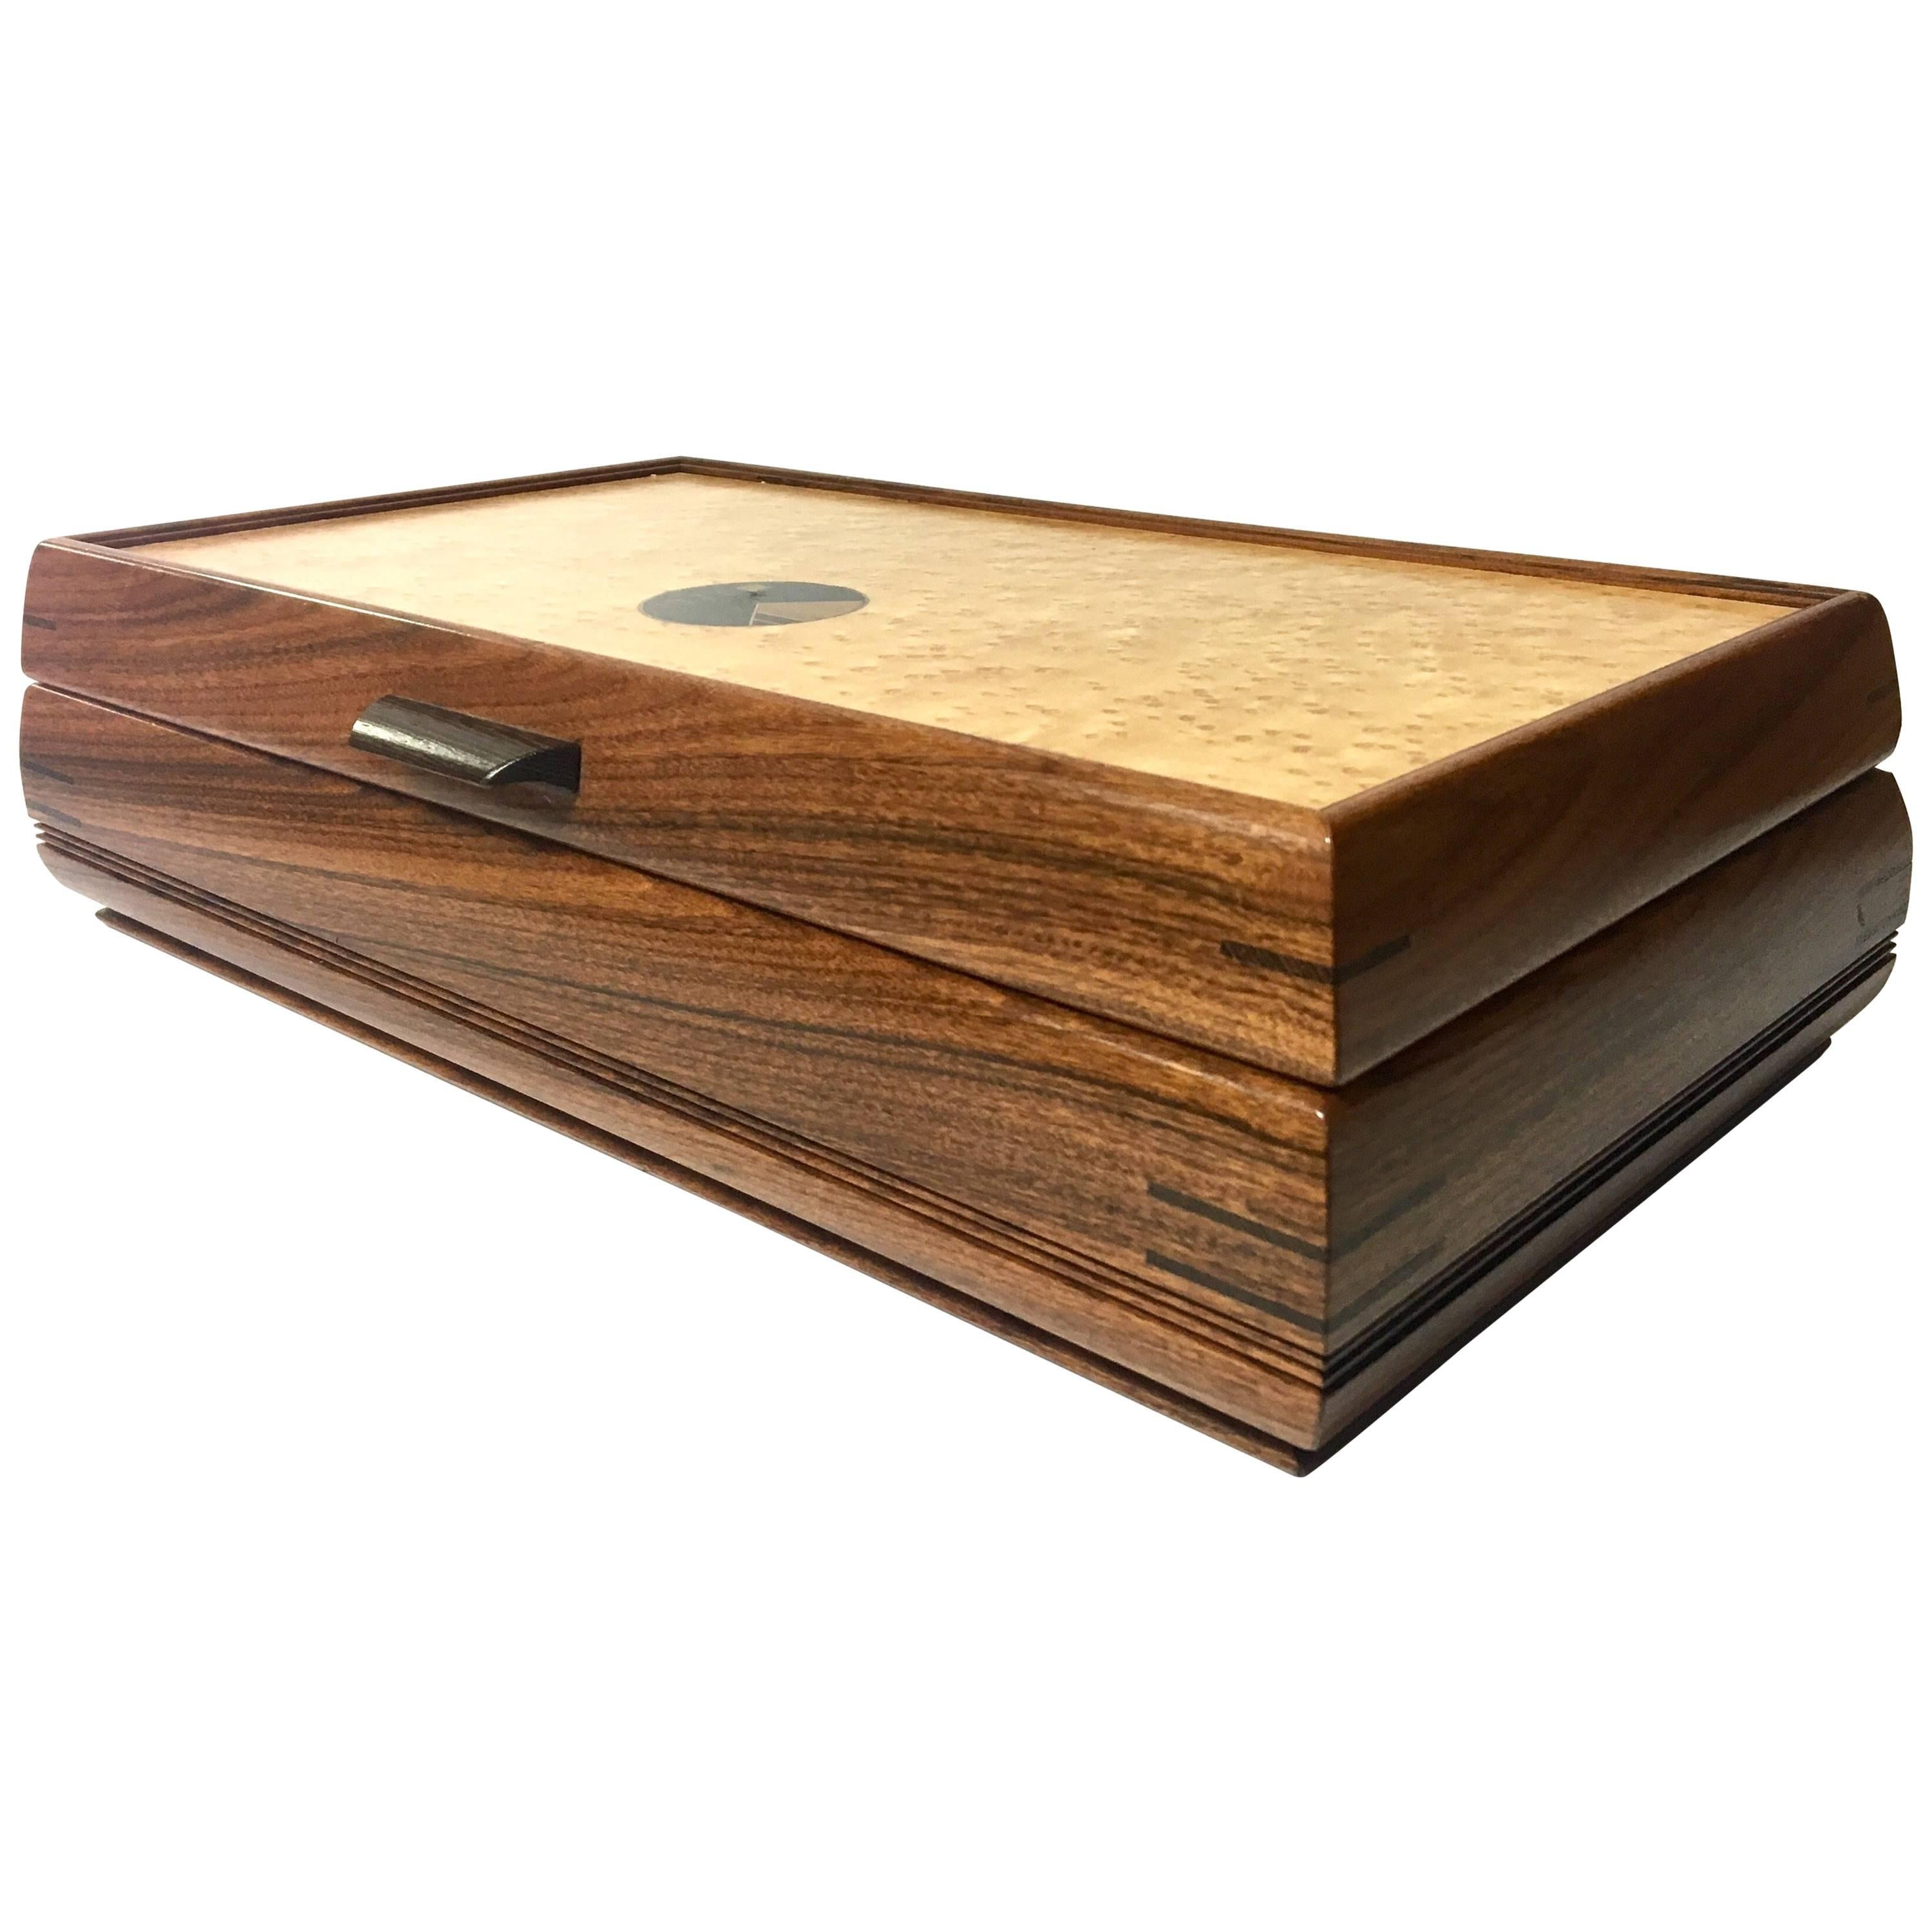 Inlaid Mixed Woods Tabletop Jewelry Box